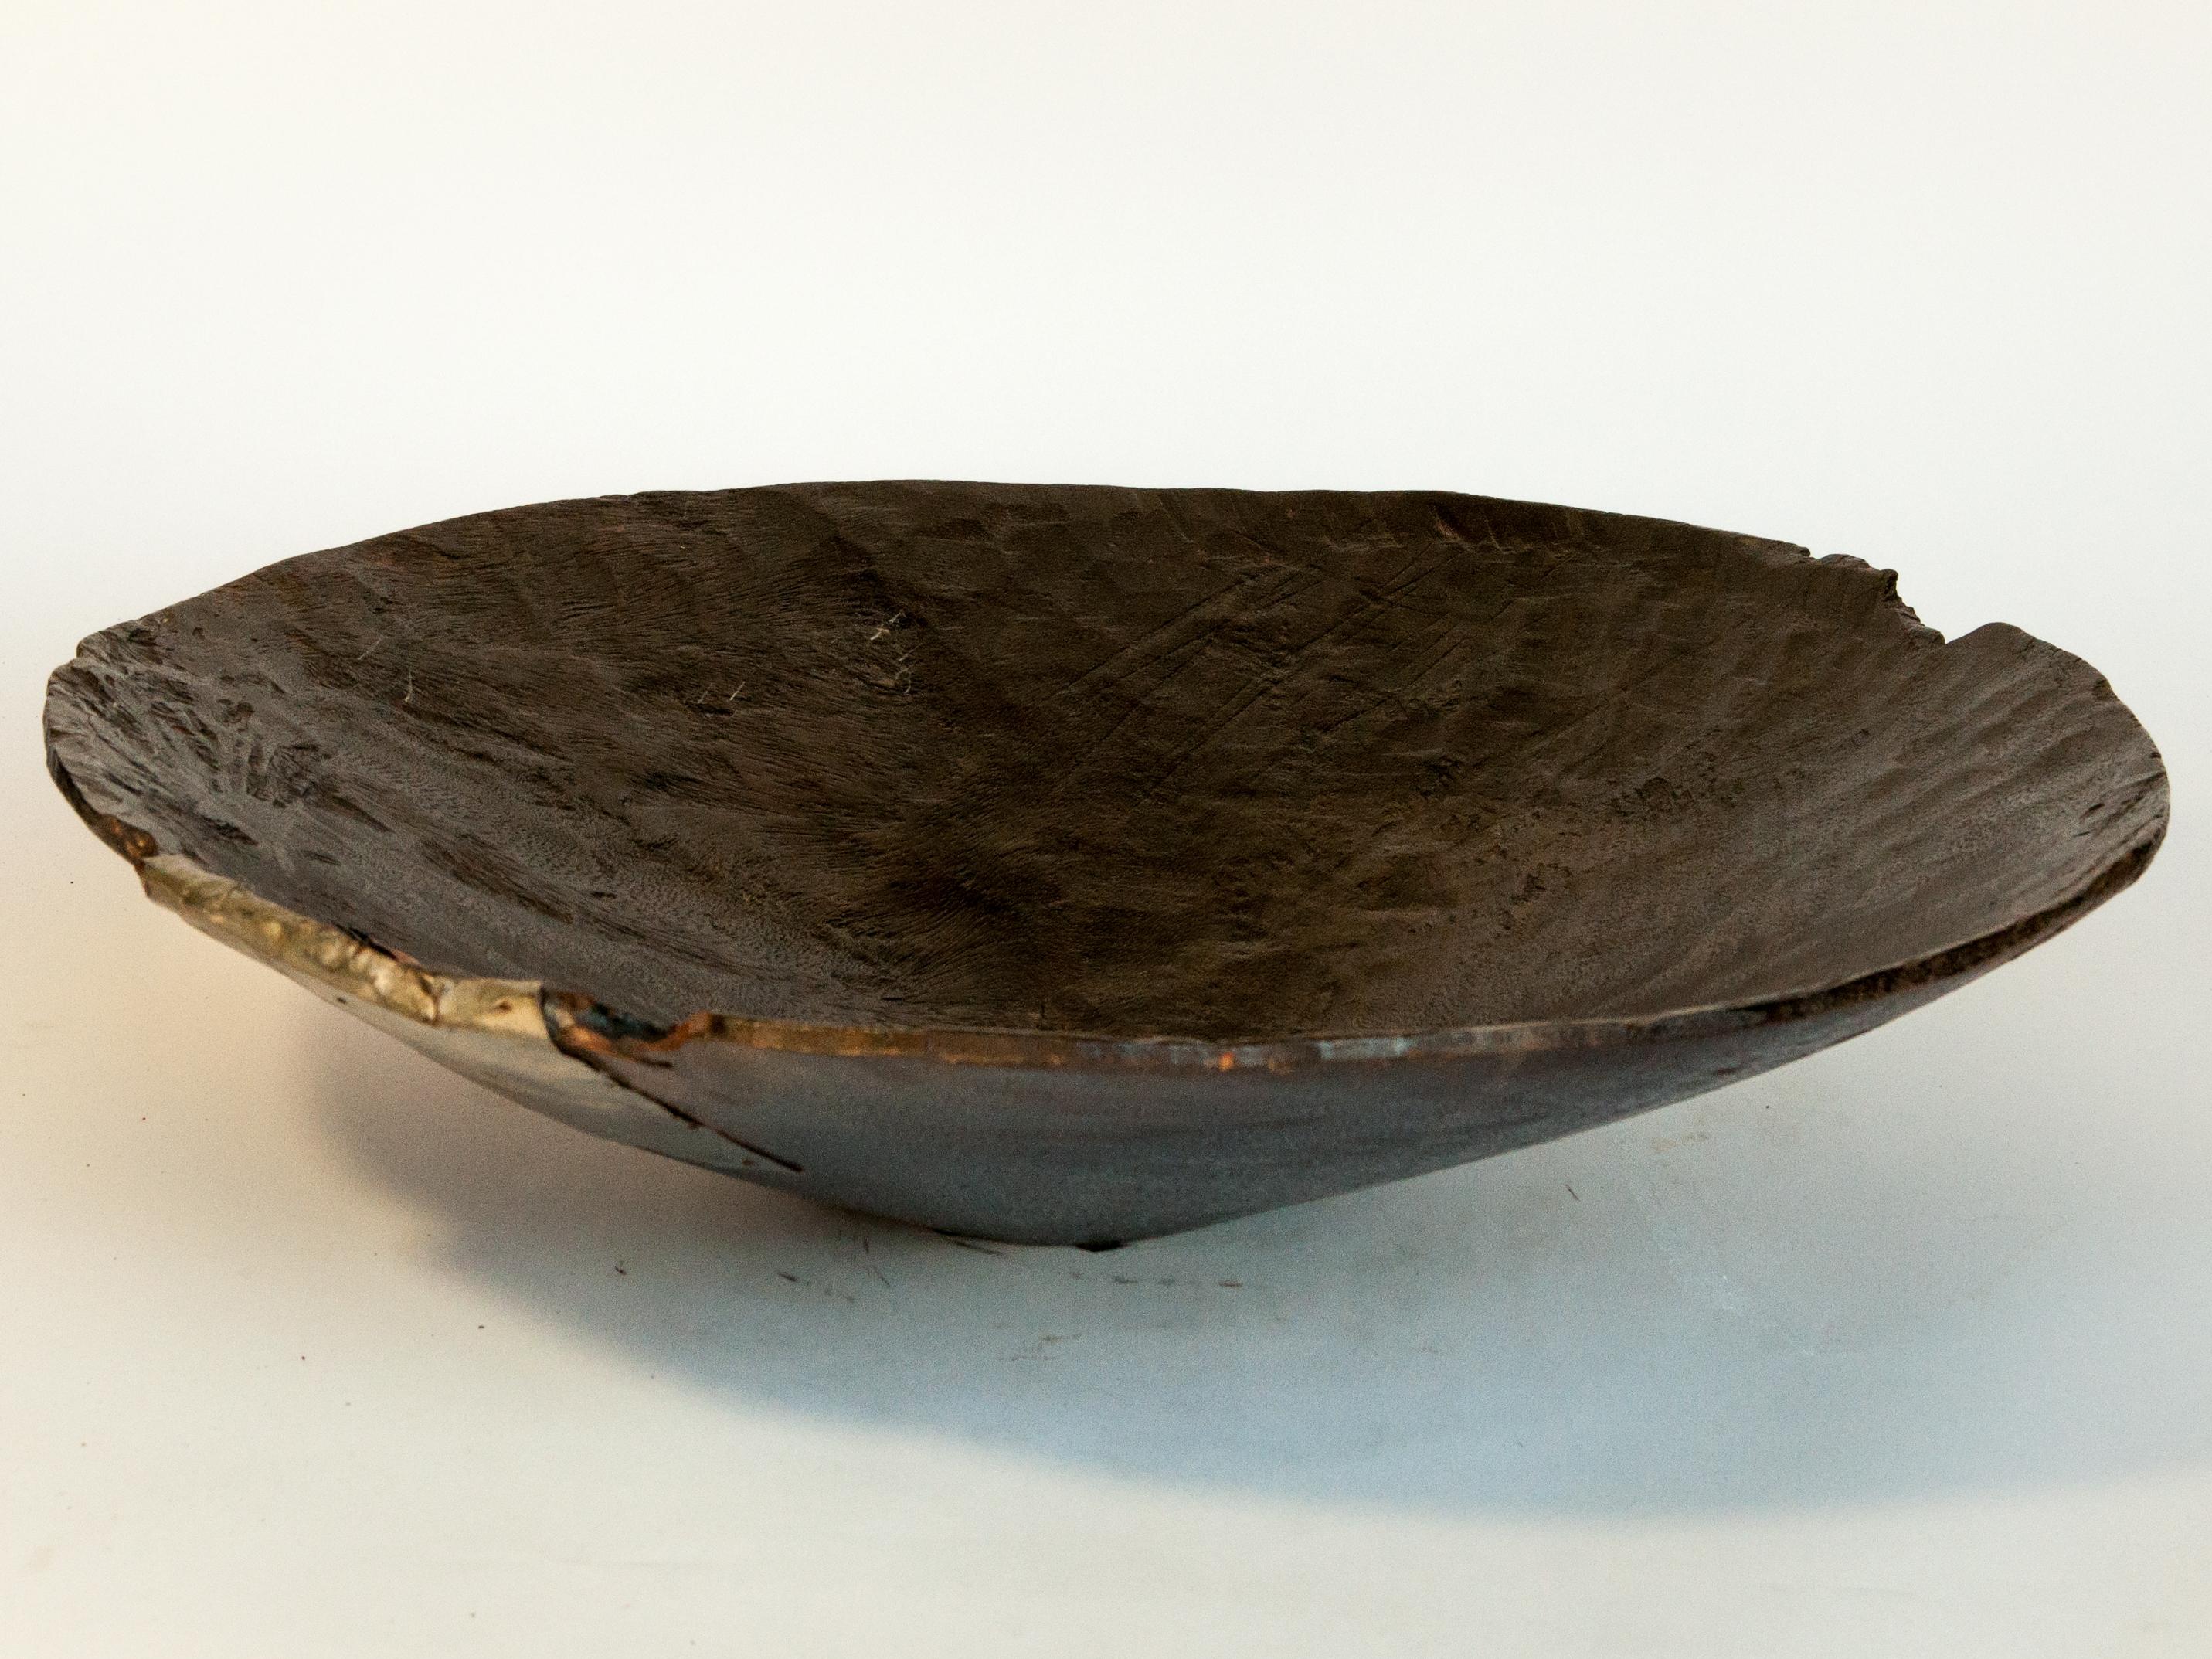 Mid-20th Century Vintage Gold Panning Tray / Bowl from Northeast Thailand, Mid-Late 20th Century